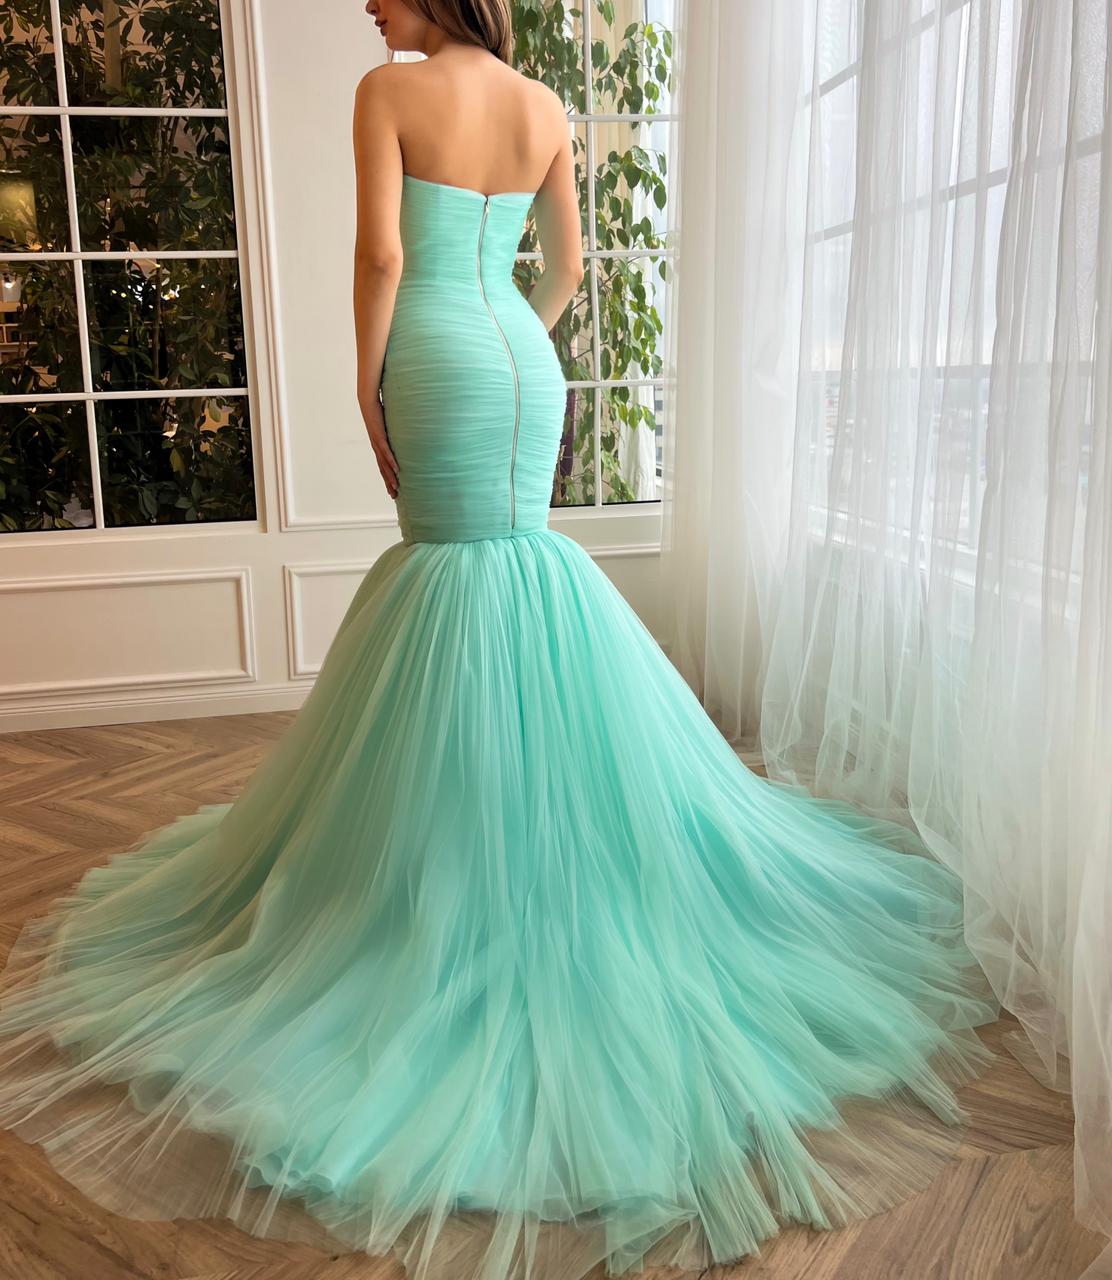 Turquoise mermaid dress with no sleeves and train